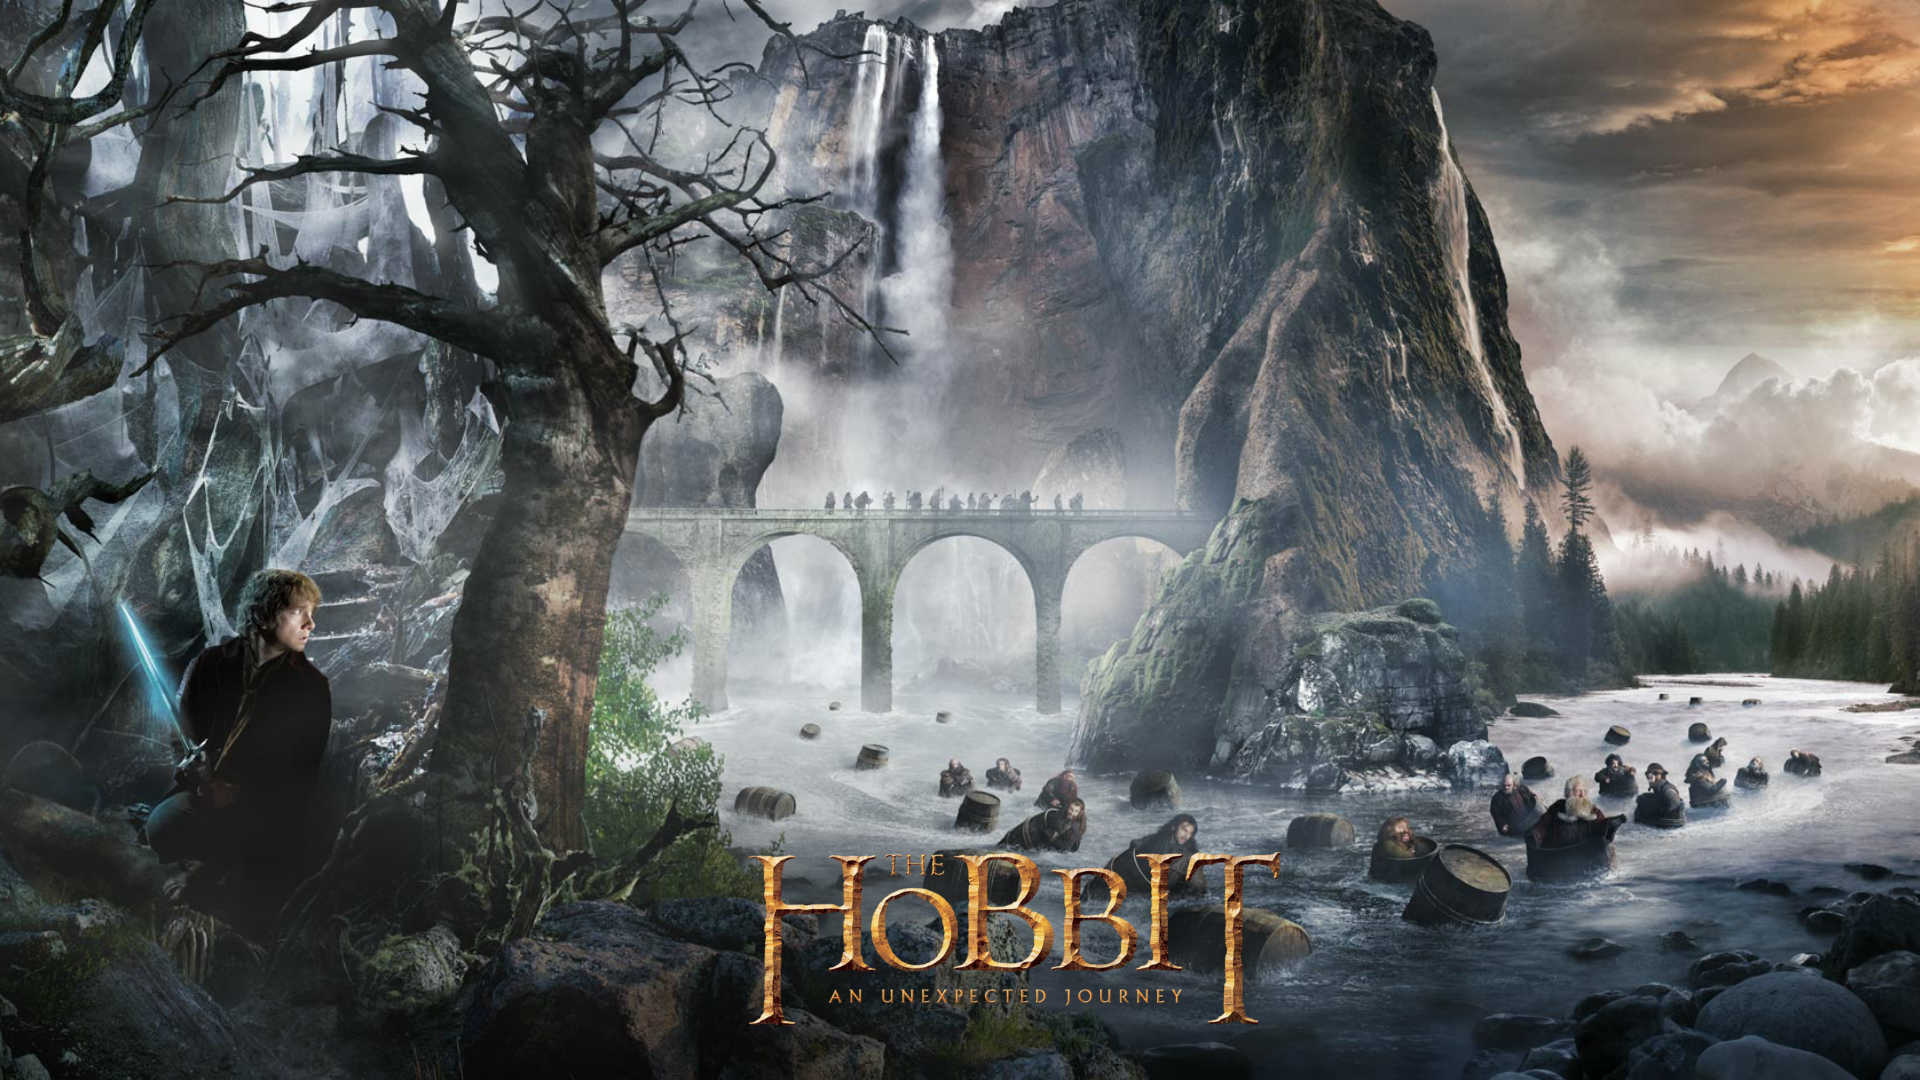 The Hobbit (Movie): The tale of Bilbo Baggins, Martin Freeman, Lonely Mountain. 1920x1080 Full HD Background.